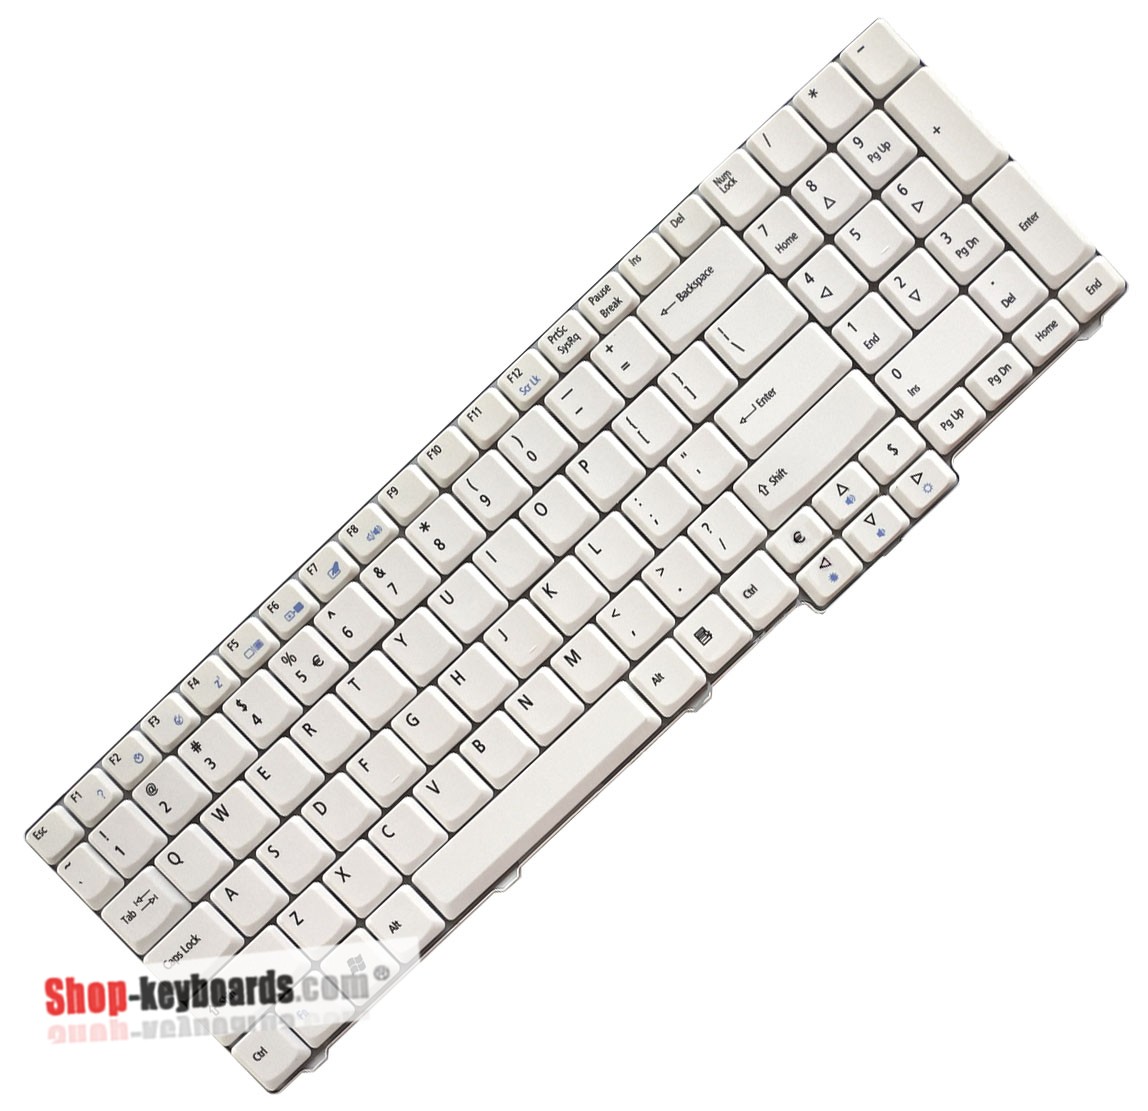 Acer Aspire 6930G-584G64MN Keyboard replacement